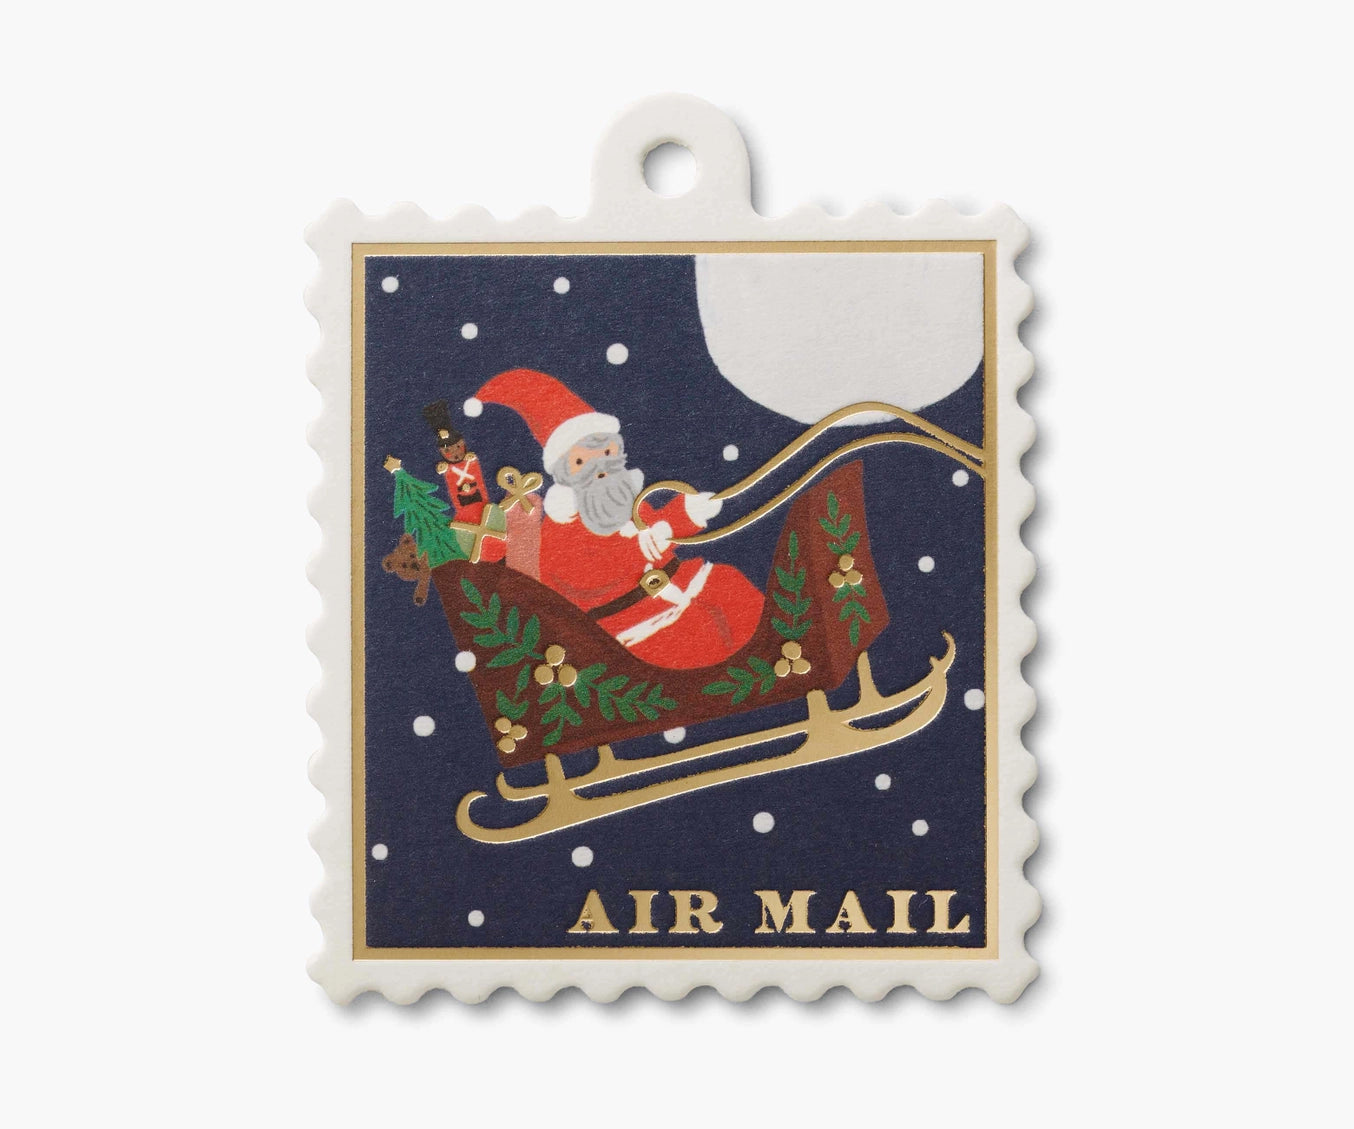 Christmas Delivery Gift Tags